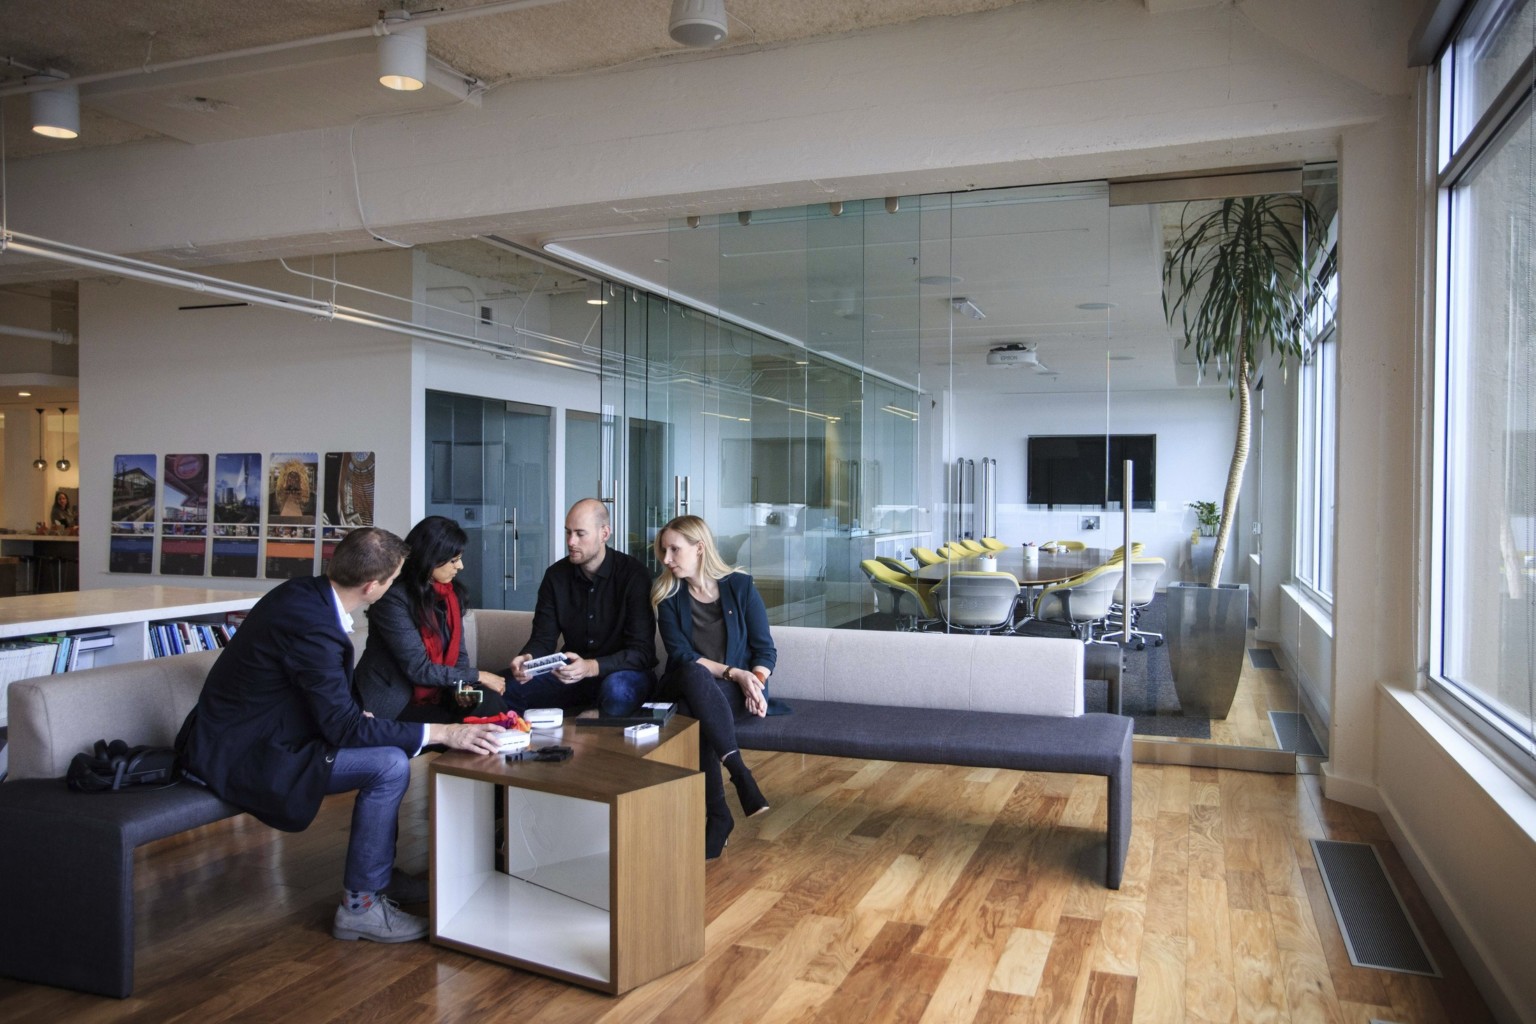 four professionals meeting over low angular wooden tables in a room with hardwood floors, broad windows, white walls